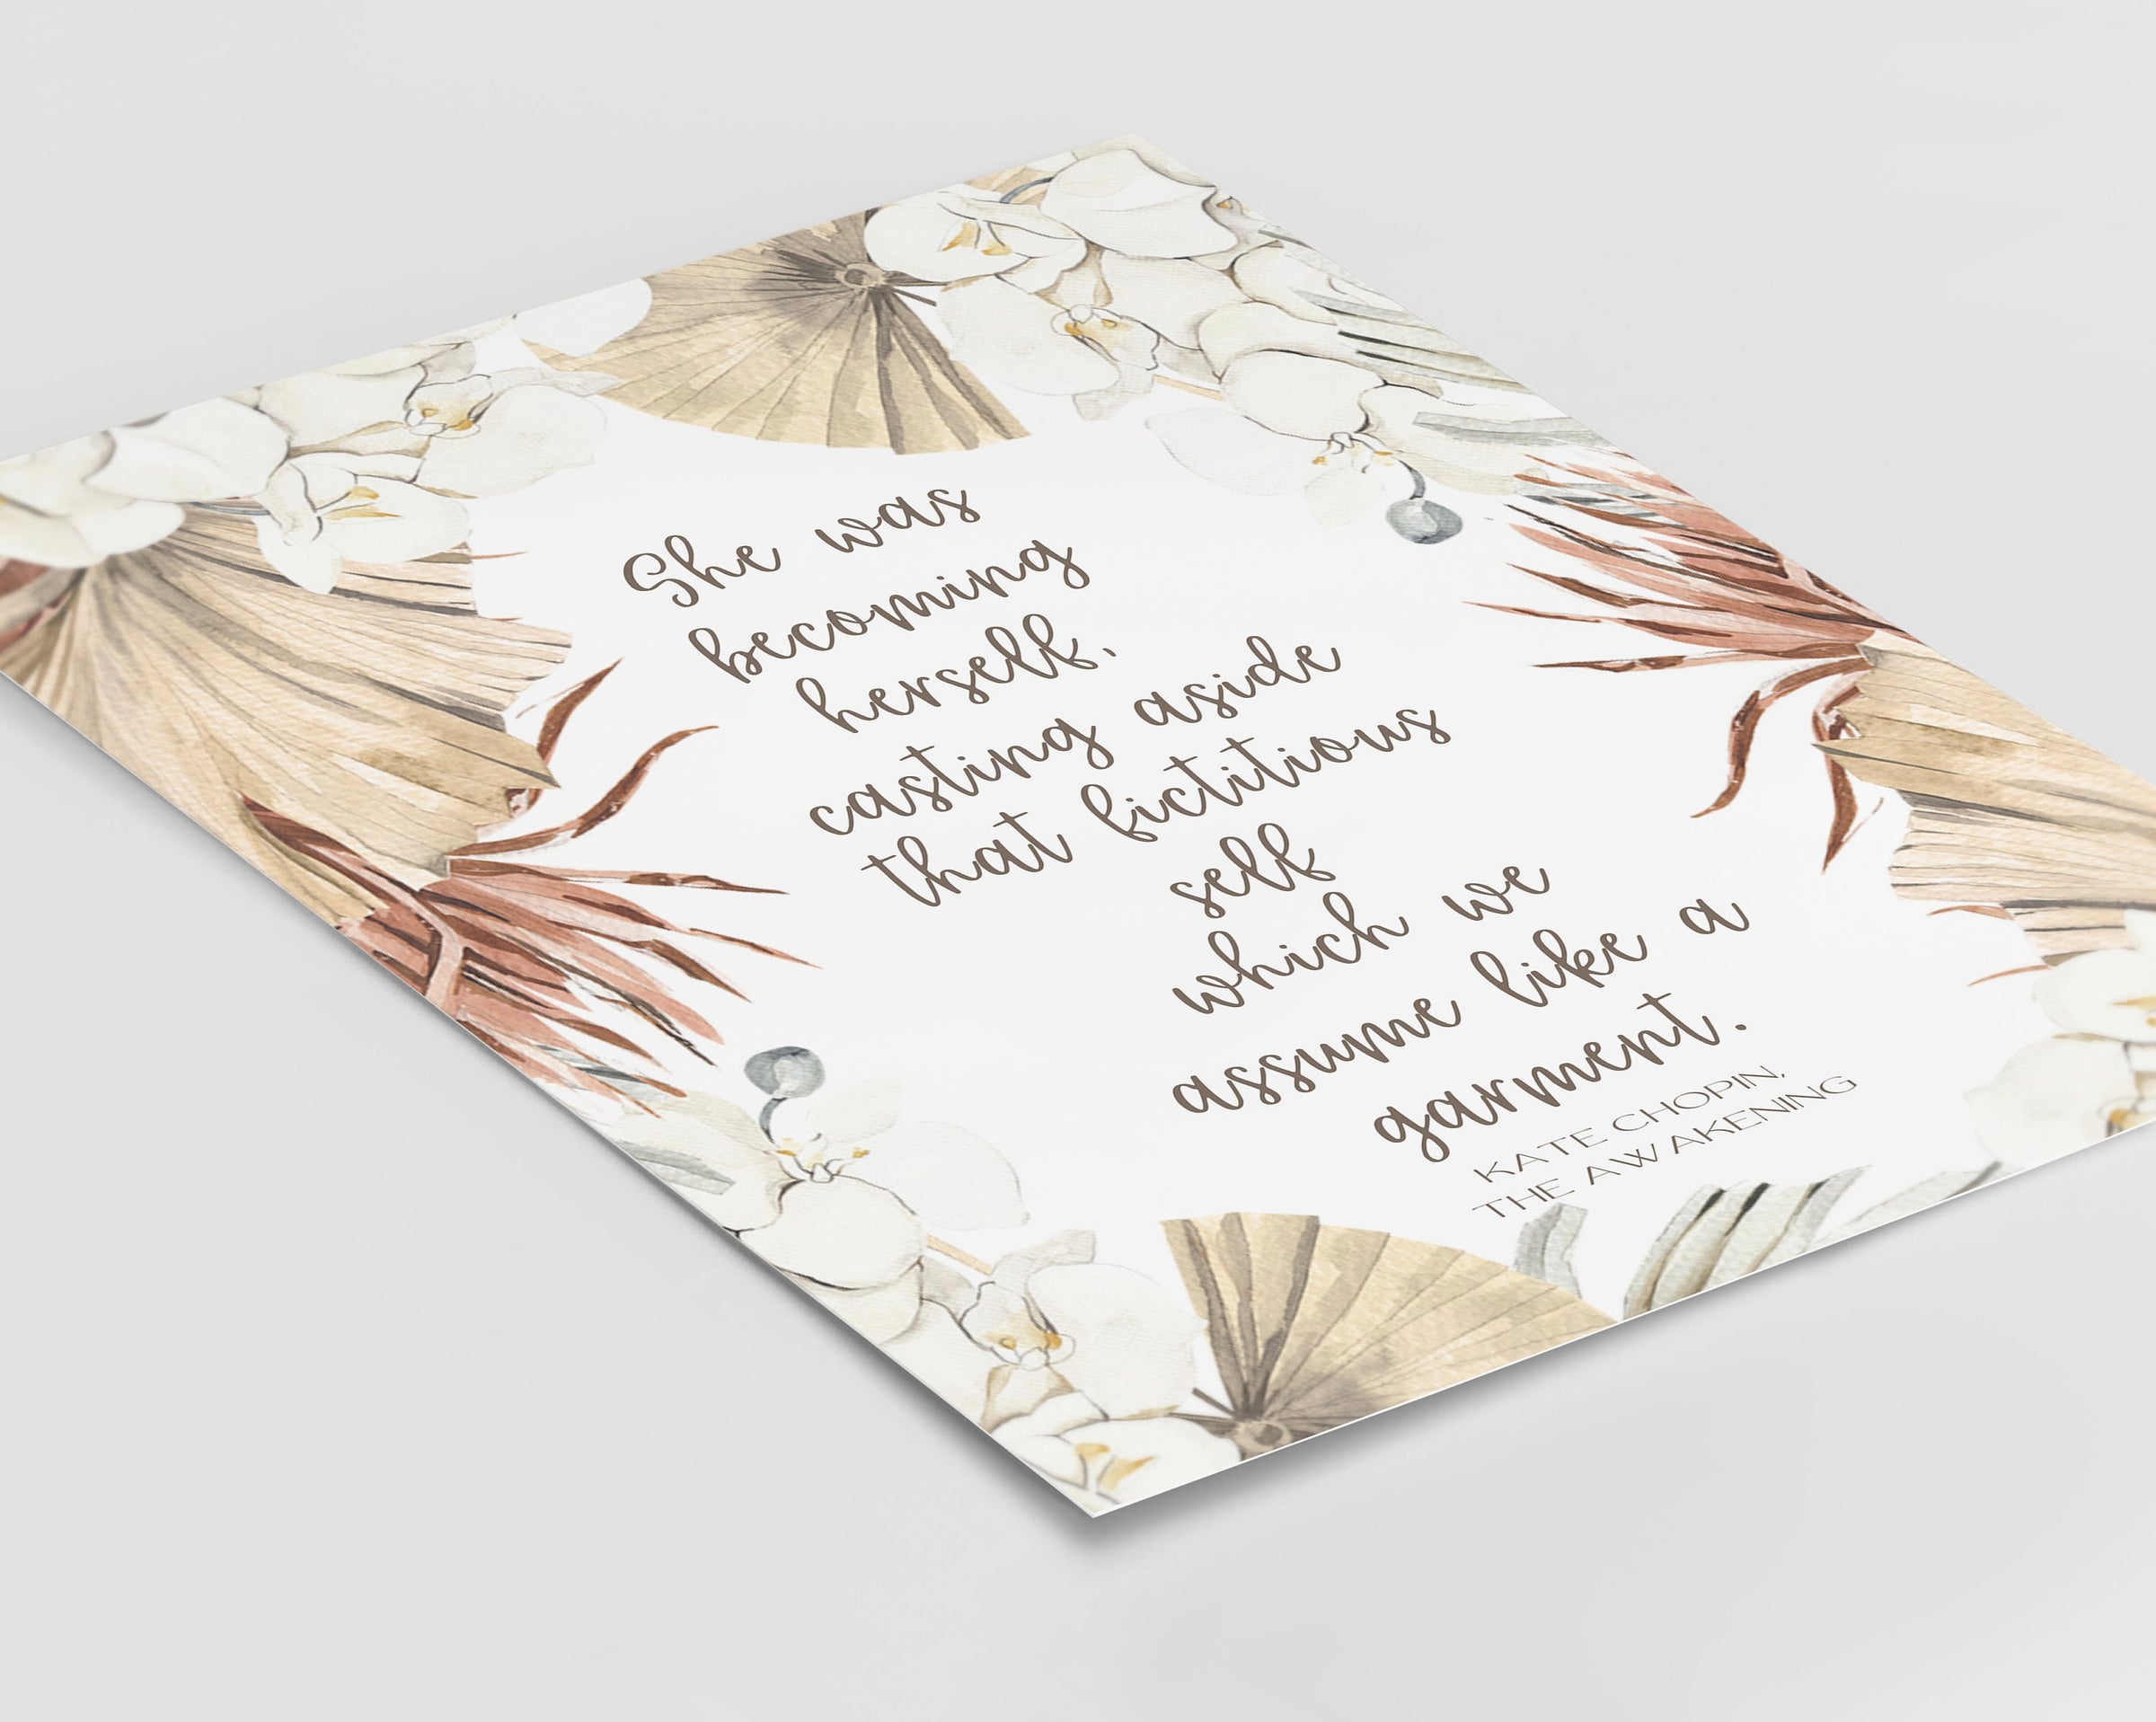 She Was Becoming Herself The Awakening Quote Inspirational Print Gift, Kate Chopin Unframed Feminist Typography Print in Neutral Colors